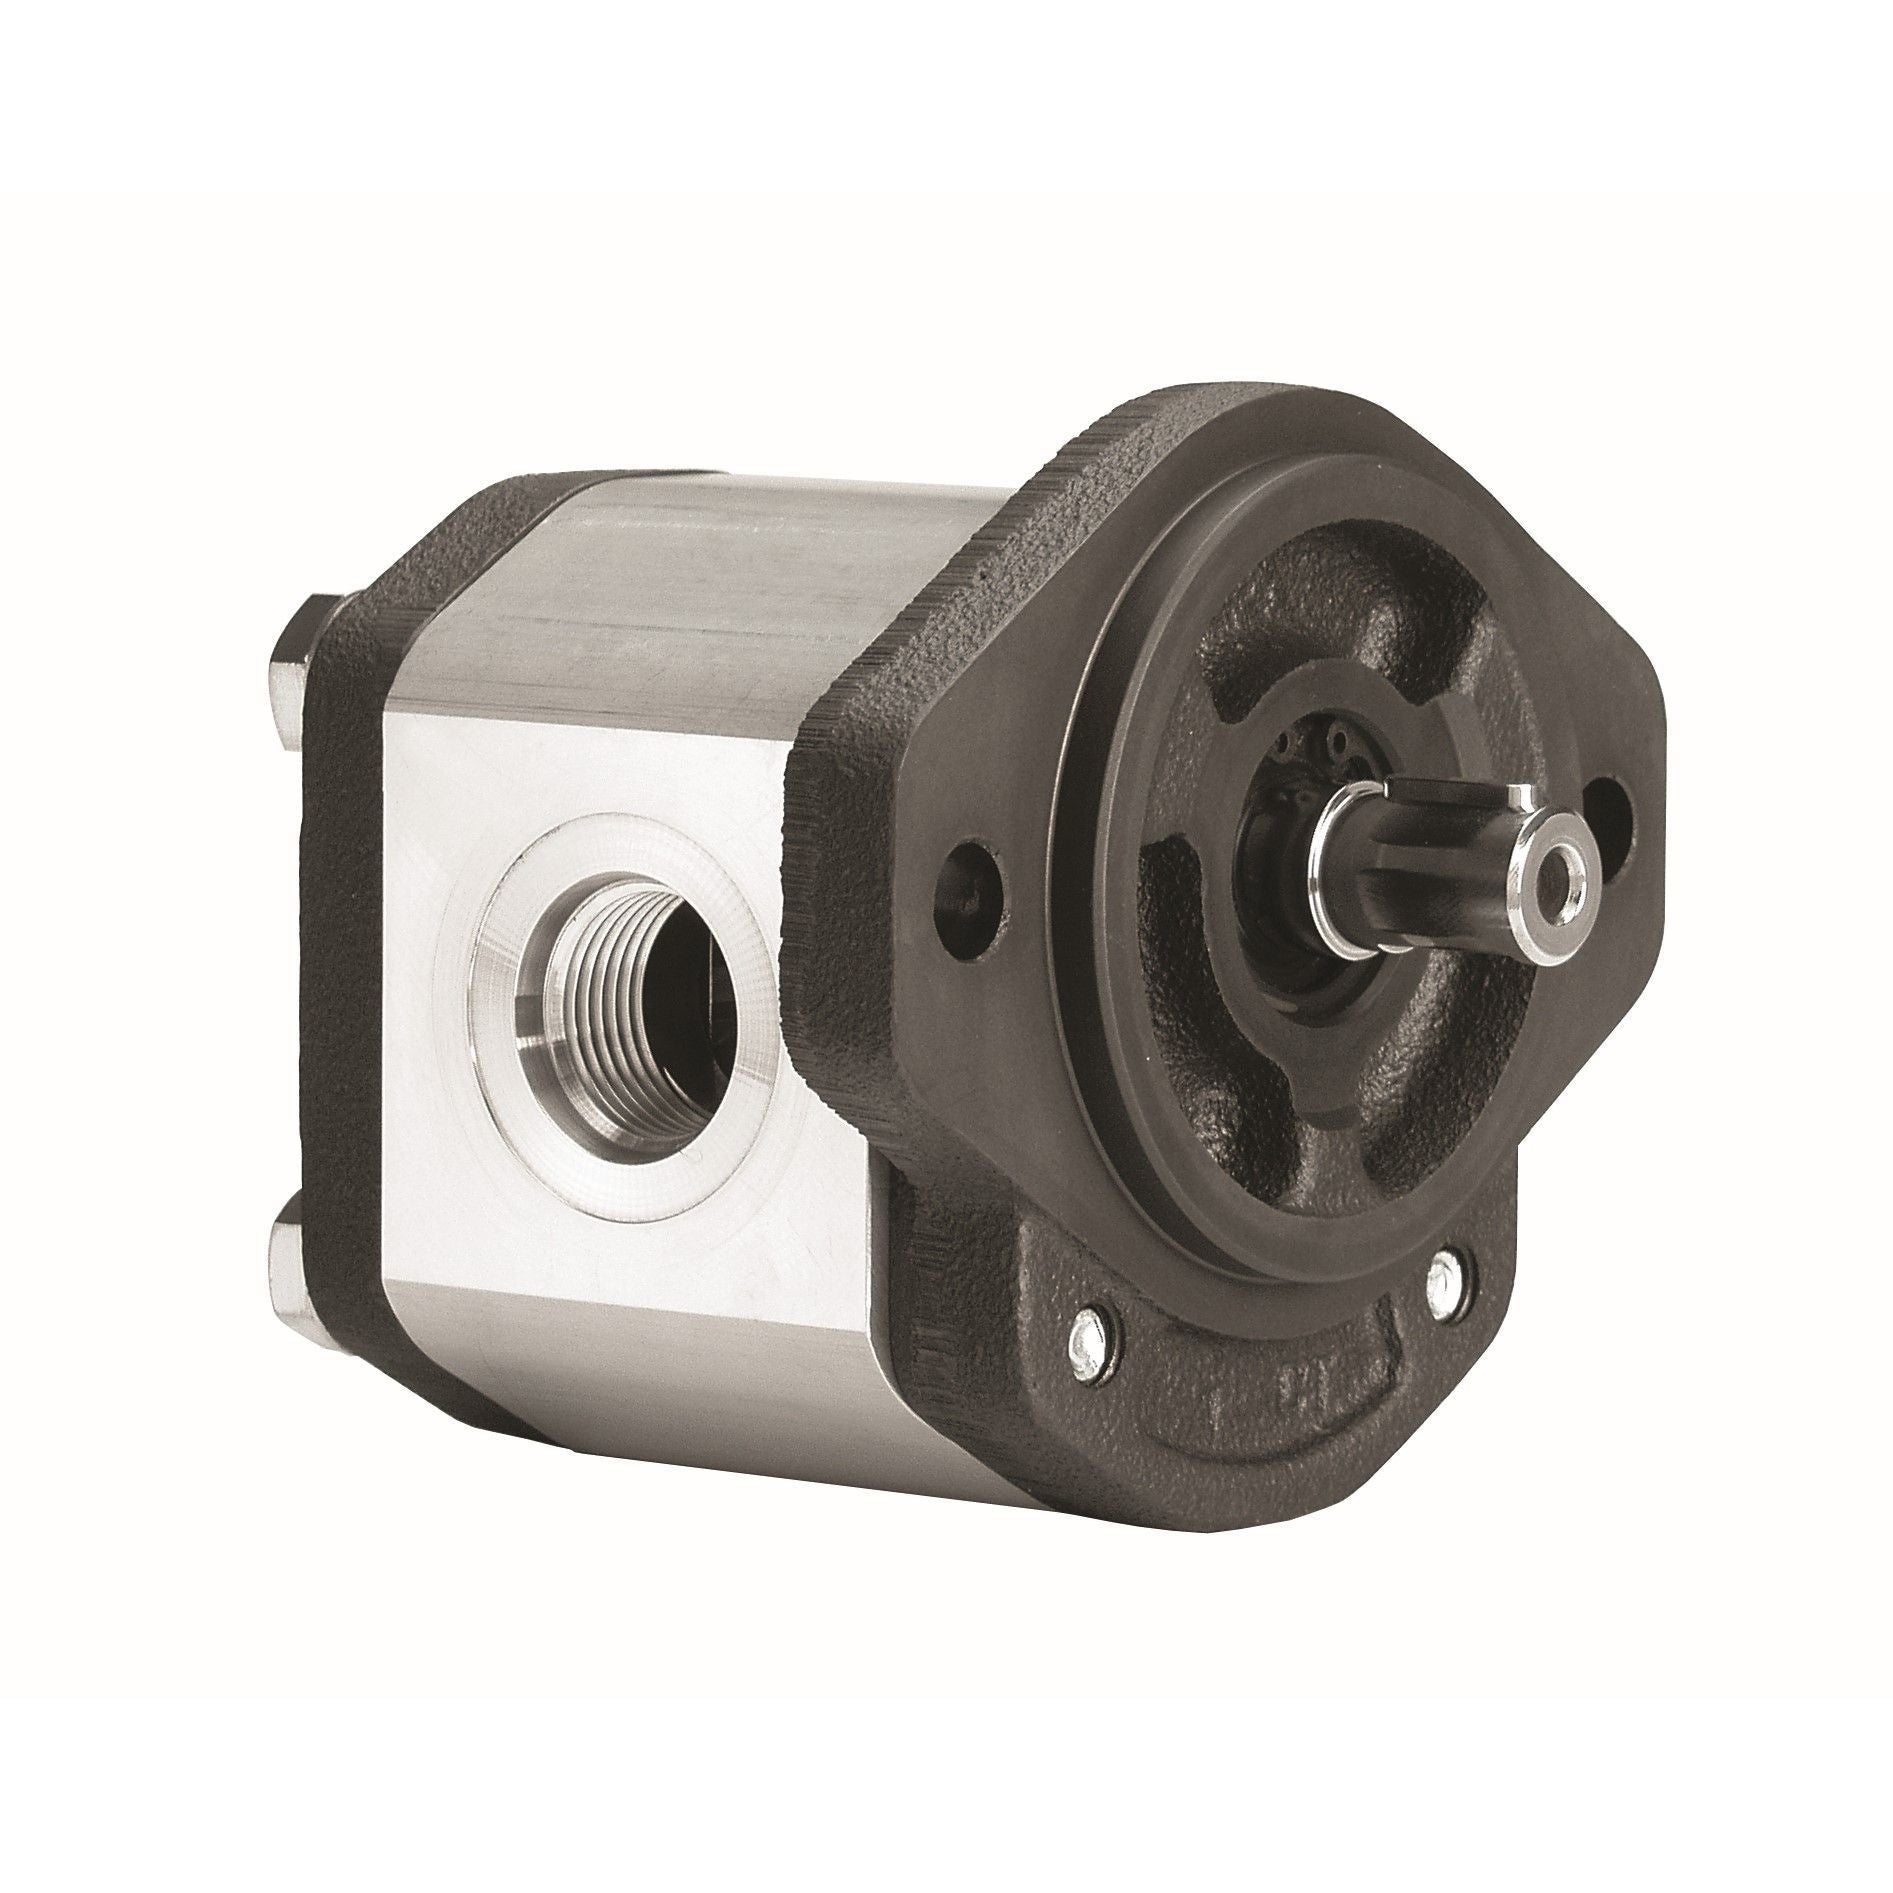 GHP2A-D-50 : Marzocchi Gear Pump, CW, 35.2cc (2.1472in3), 16.73 GPM, 2320psi, 2000 RPM, #12 SAE (3/4") In, #10 SAE (5/8") Out, Keyed Shaft 5/8" Bore x 5/32" Key, SAE A 2-Bolt Mount